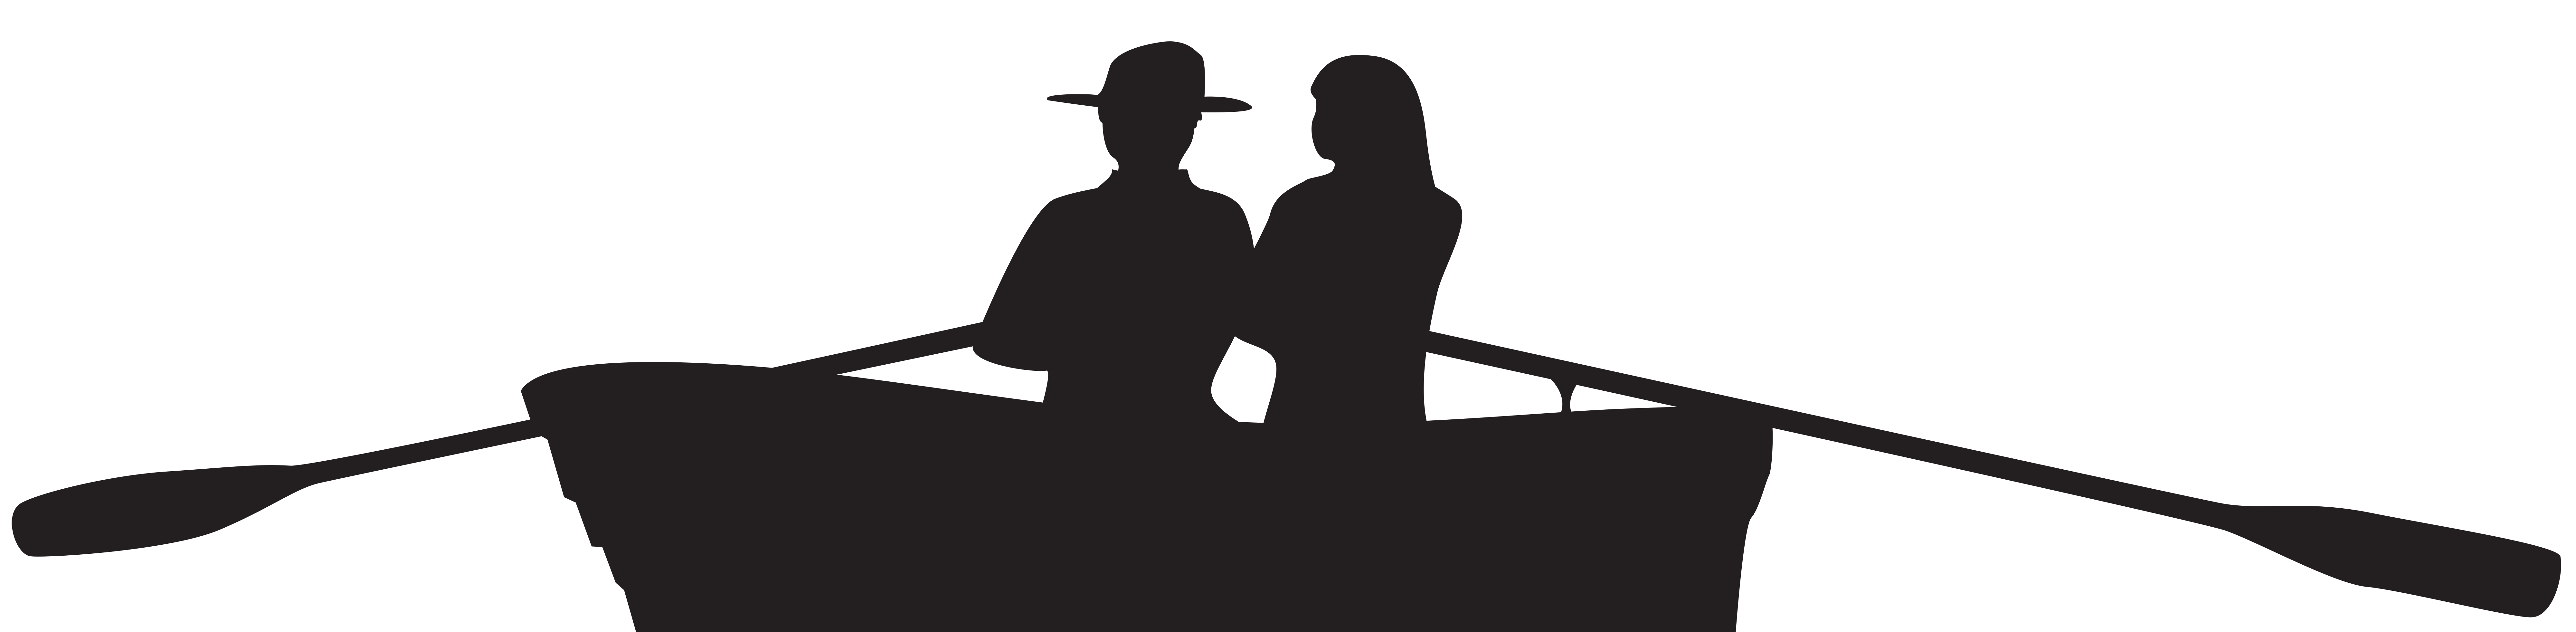 Couple On Boat Silhouette Png Clip Art Image Gallery Yopriceville